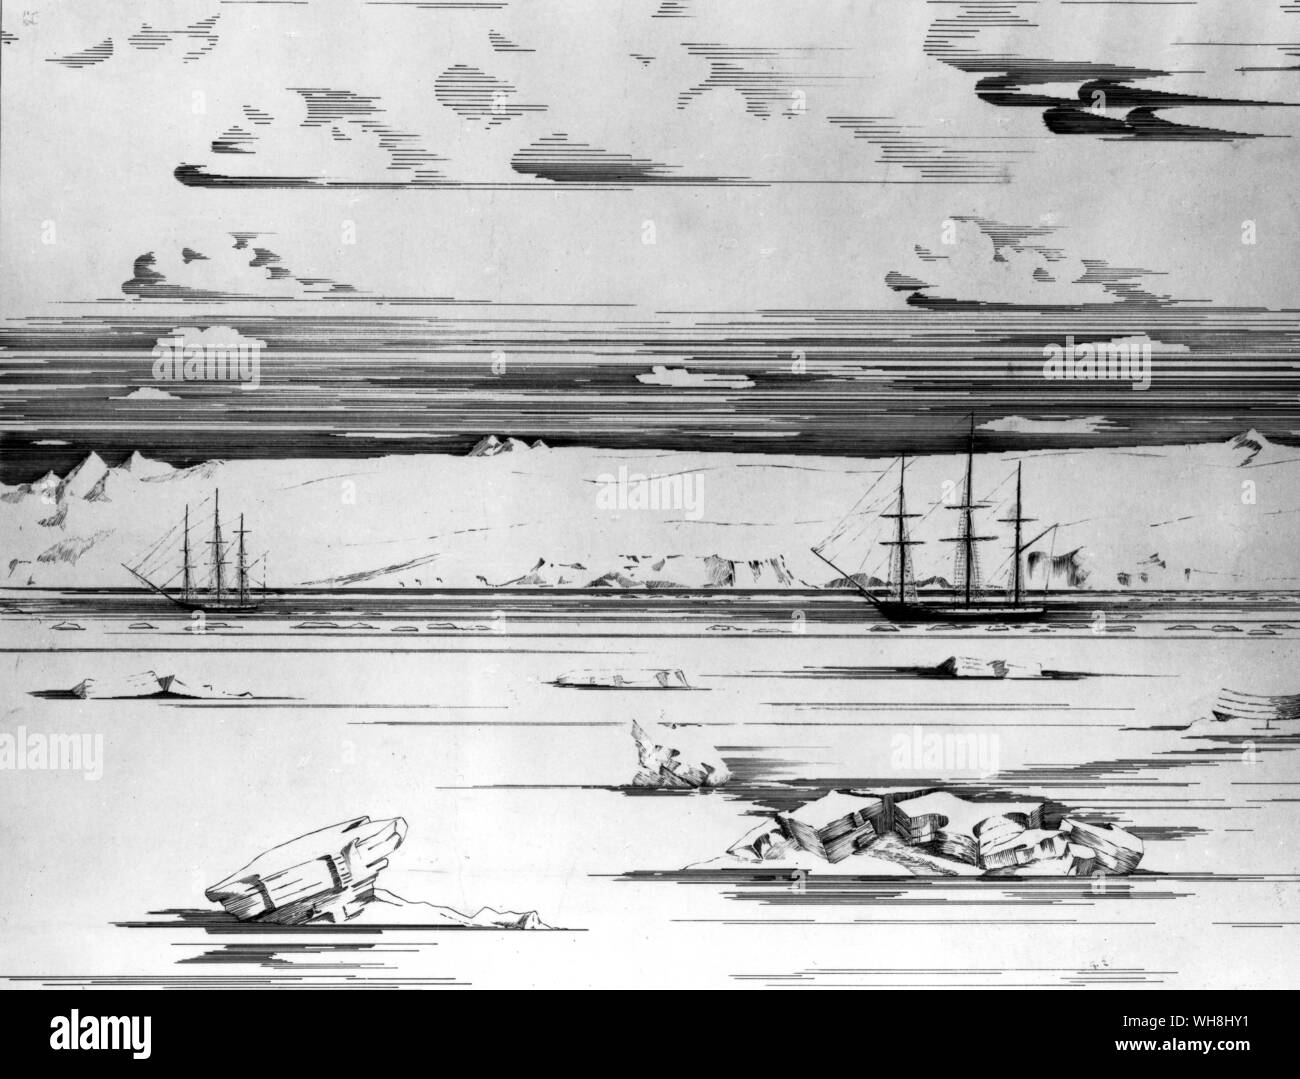 Fabian Gottlieb von Bellingshausen's ships - Vostok and Mirnyi. Bellingshausen explored Antarctica in the Vostok in 1820. Antarctica: The Last Continent by Ian Cameron, page 74. Stock Photo